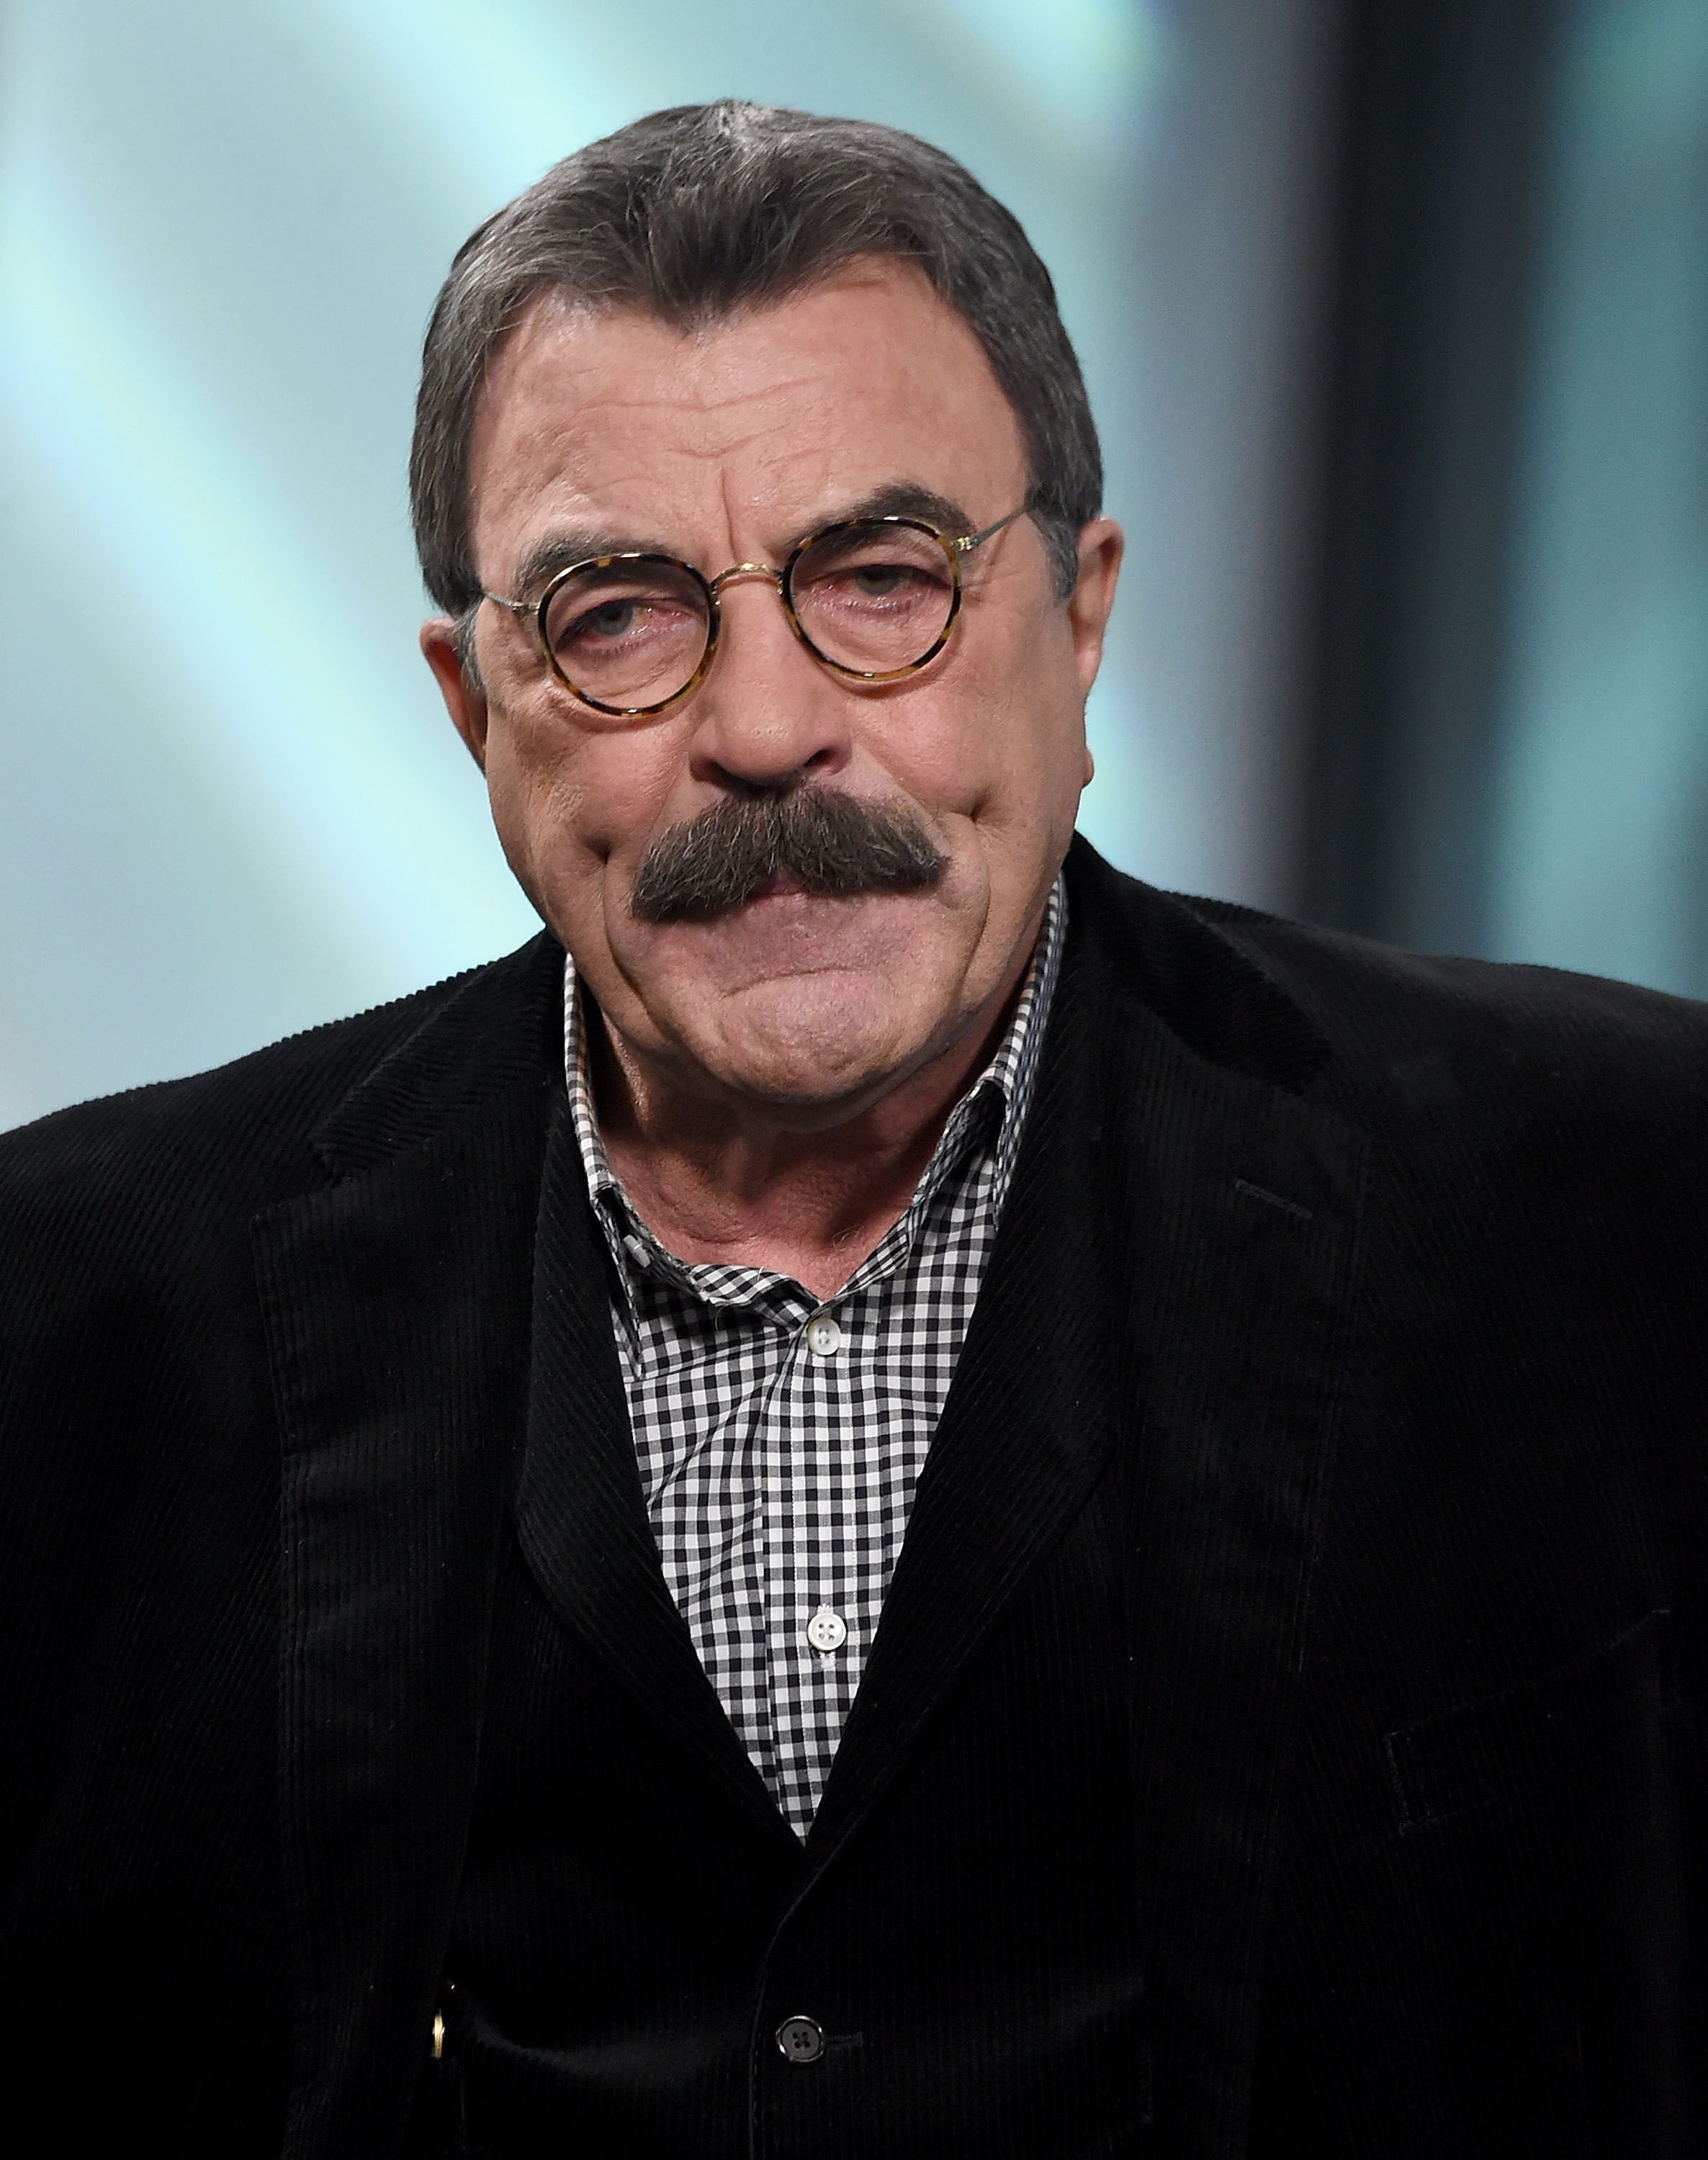 Tom Selleck at the Build Series to discuss his show "Blue Bloods at Build Studio on September 29, 2017 | Photo: Getty Images